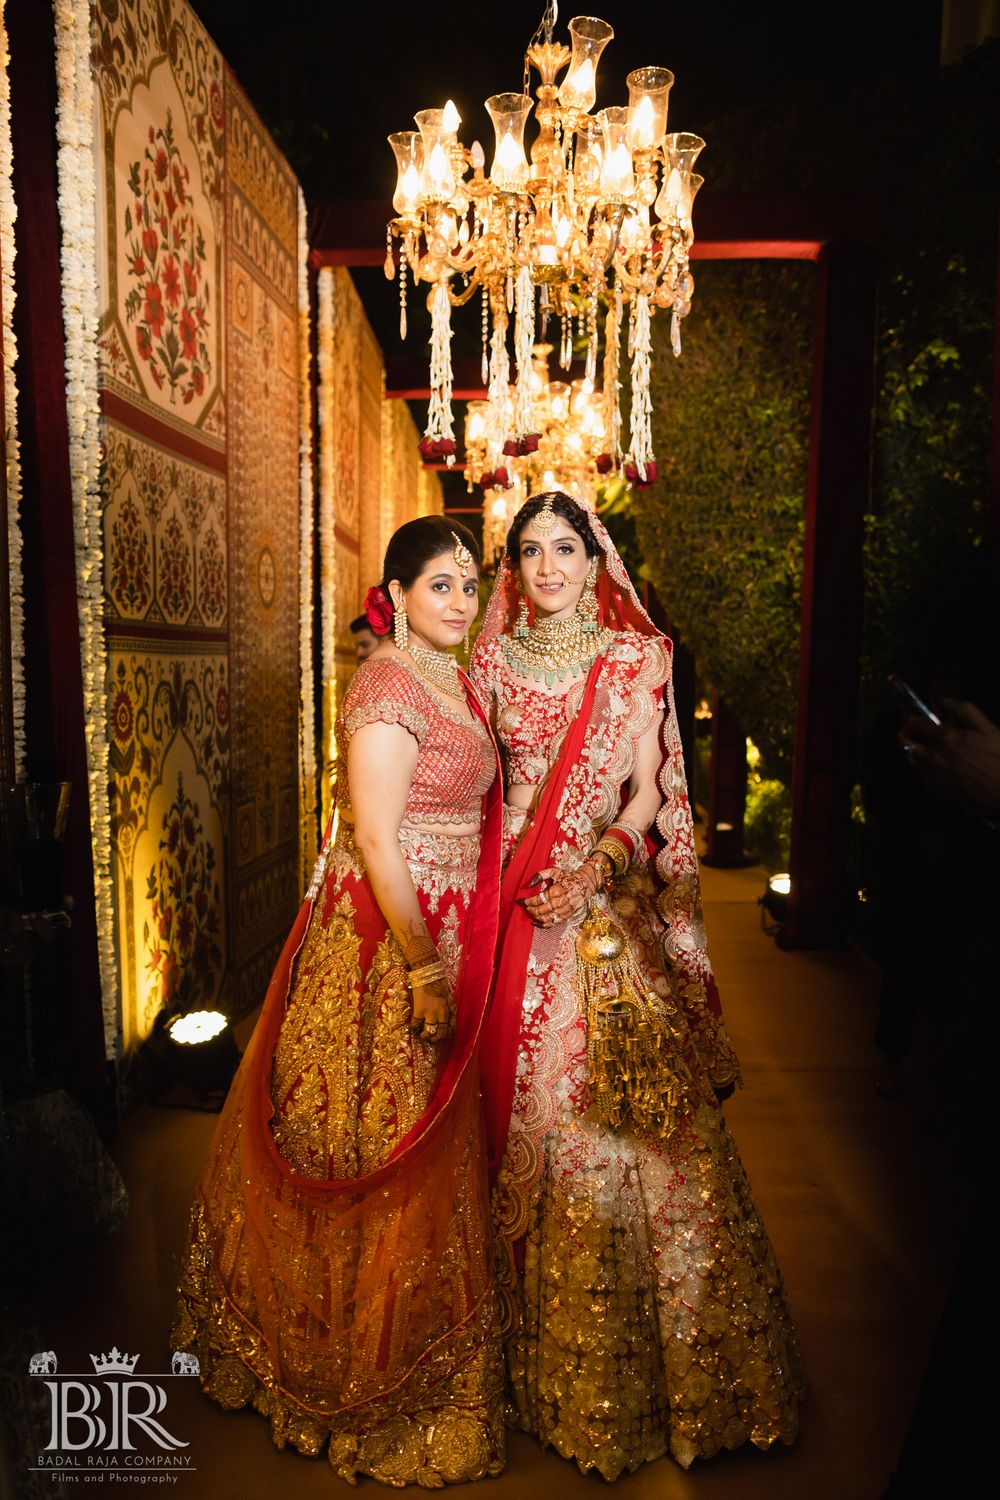 Photo of Bride in a red lehenga posing with a bridesmaid